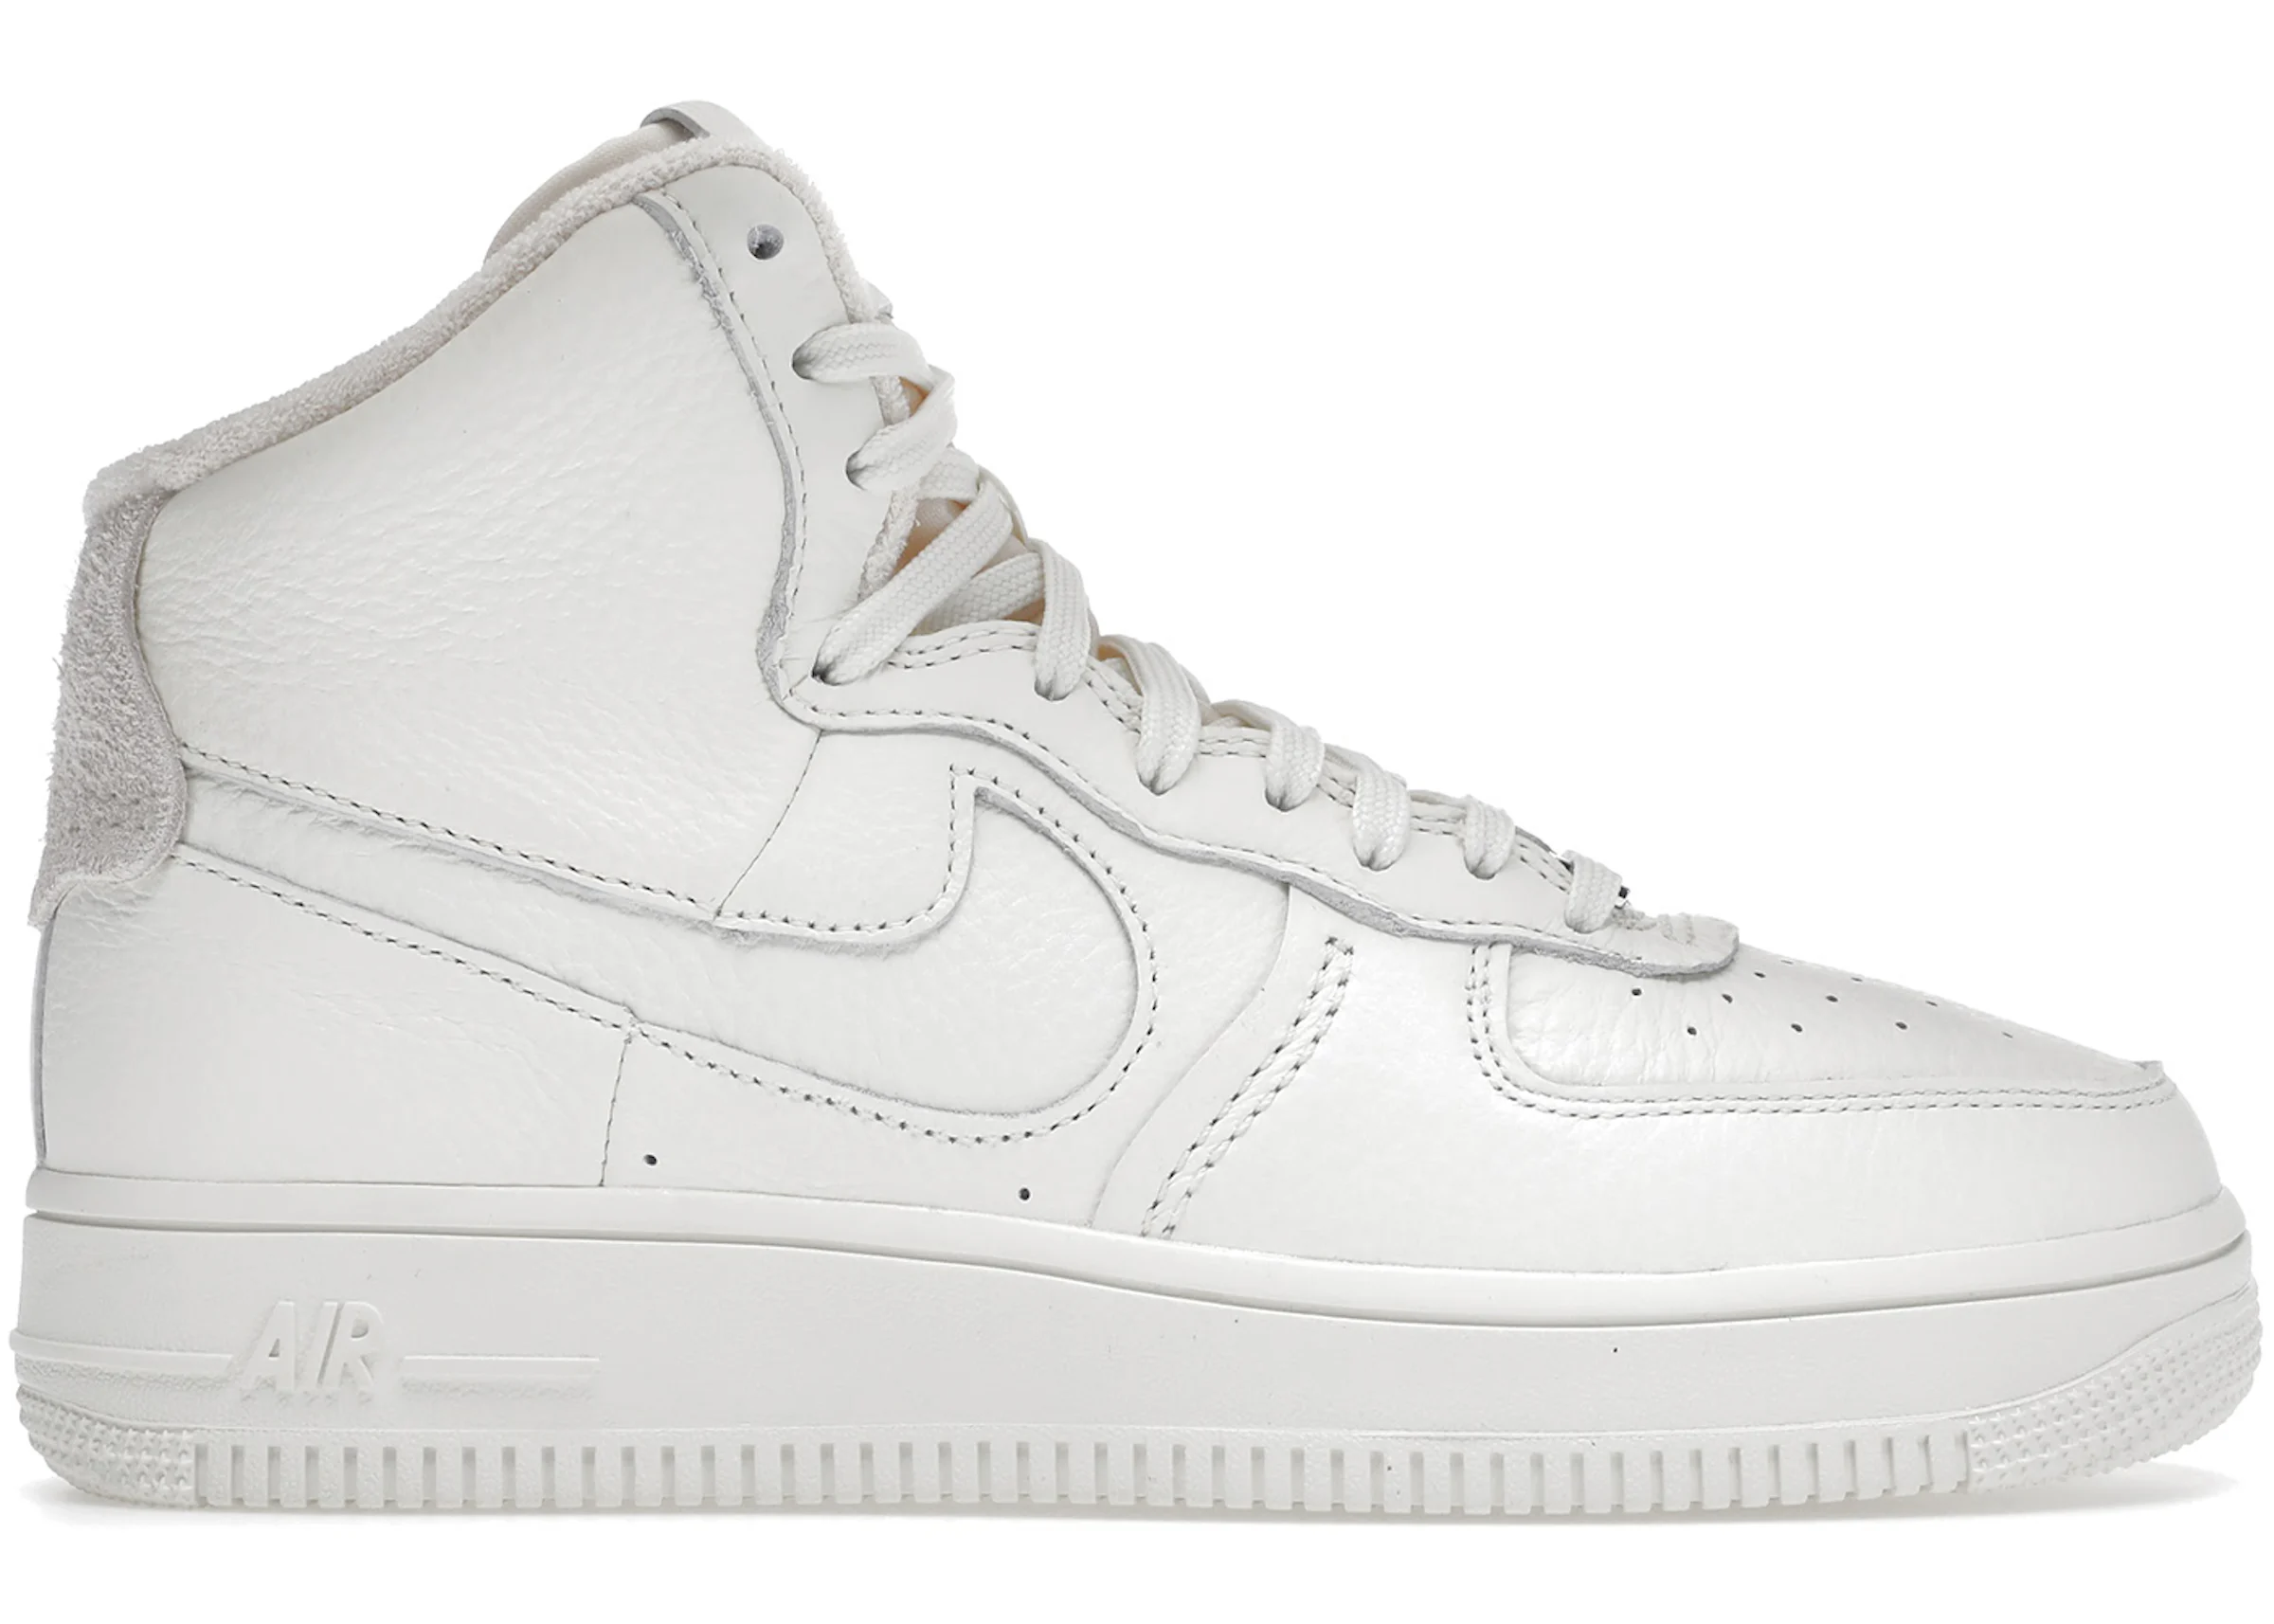 First Looks // Nike Air Force 1 High Utility 2.0 “Shapeless